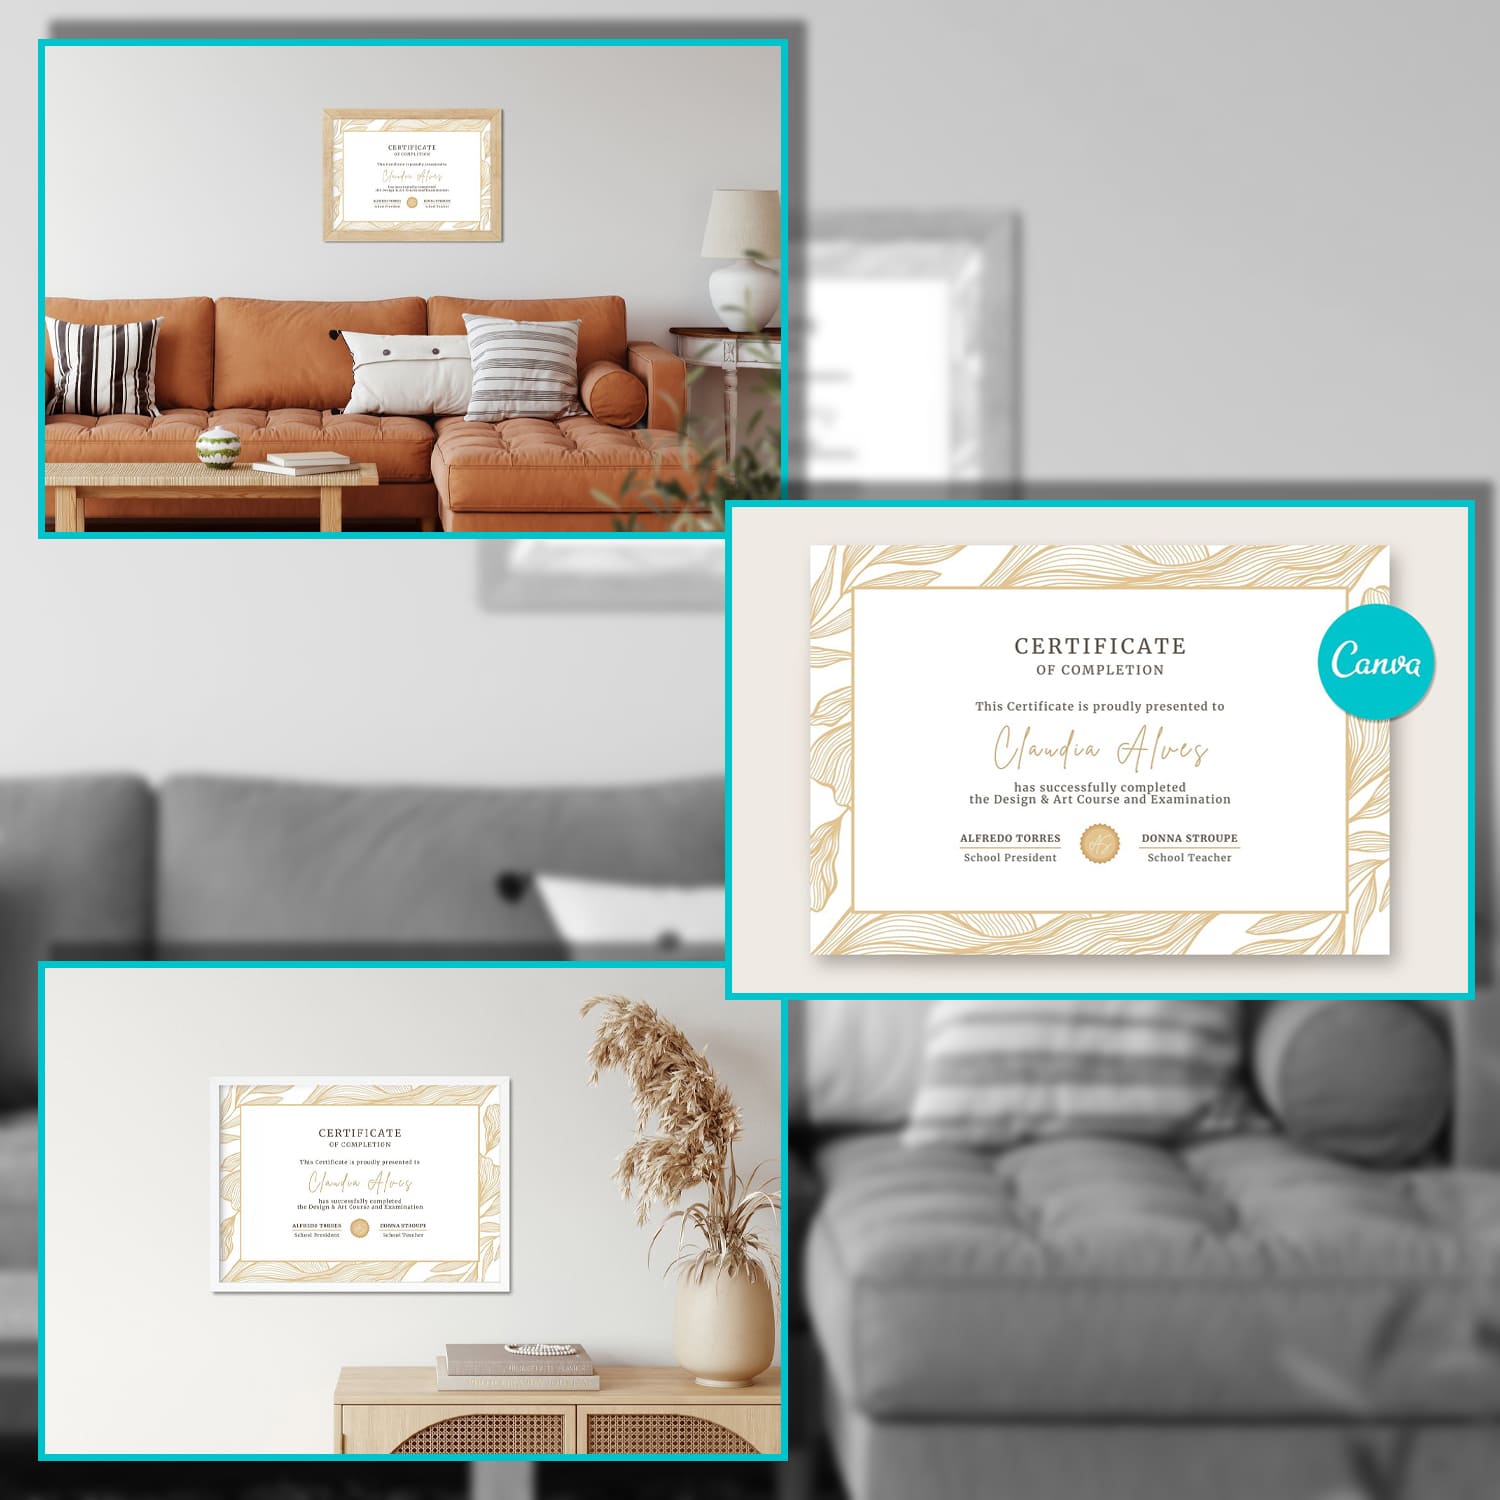 Certificate of Completion with Golden Waves - Editable Canva Template.